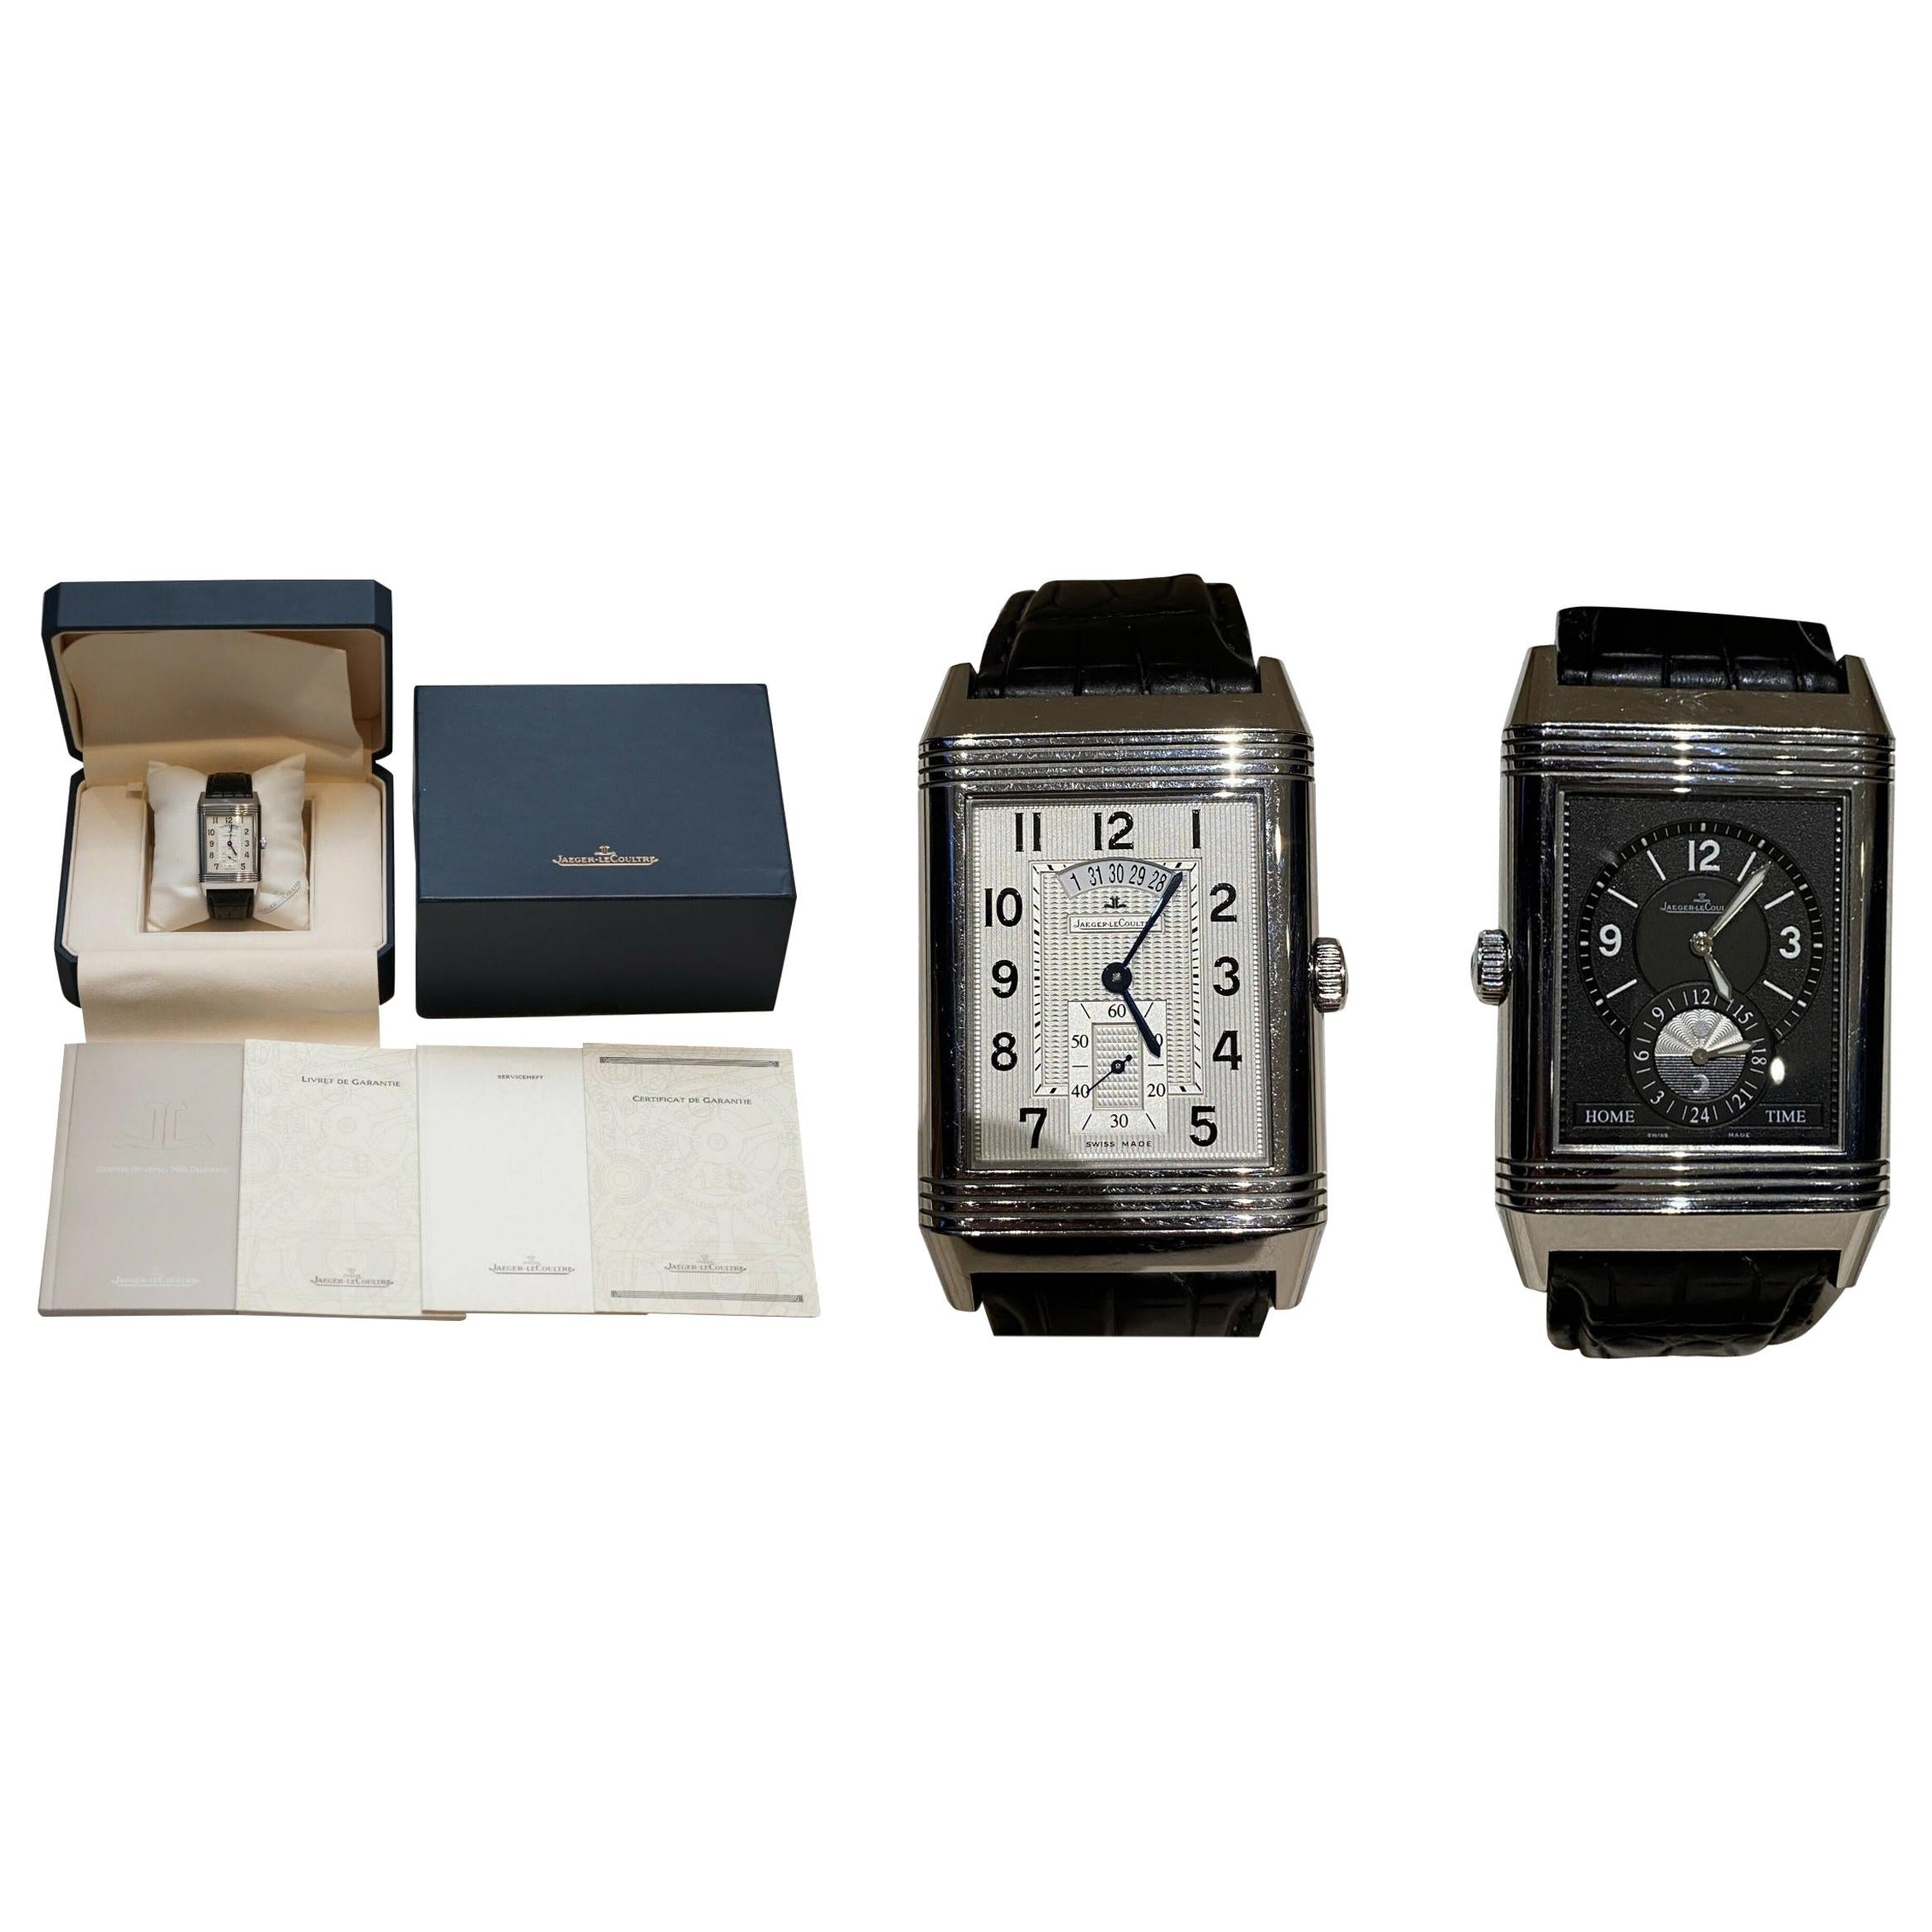 Ltd Edition Jager Lecoultre Grand Reverso 986 Duodate Double Sided Wristwatch